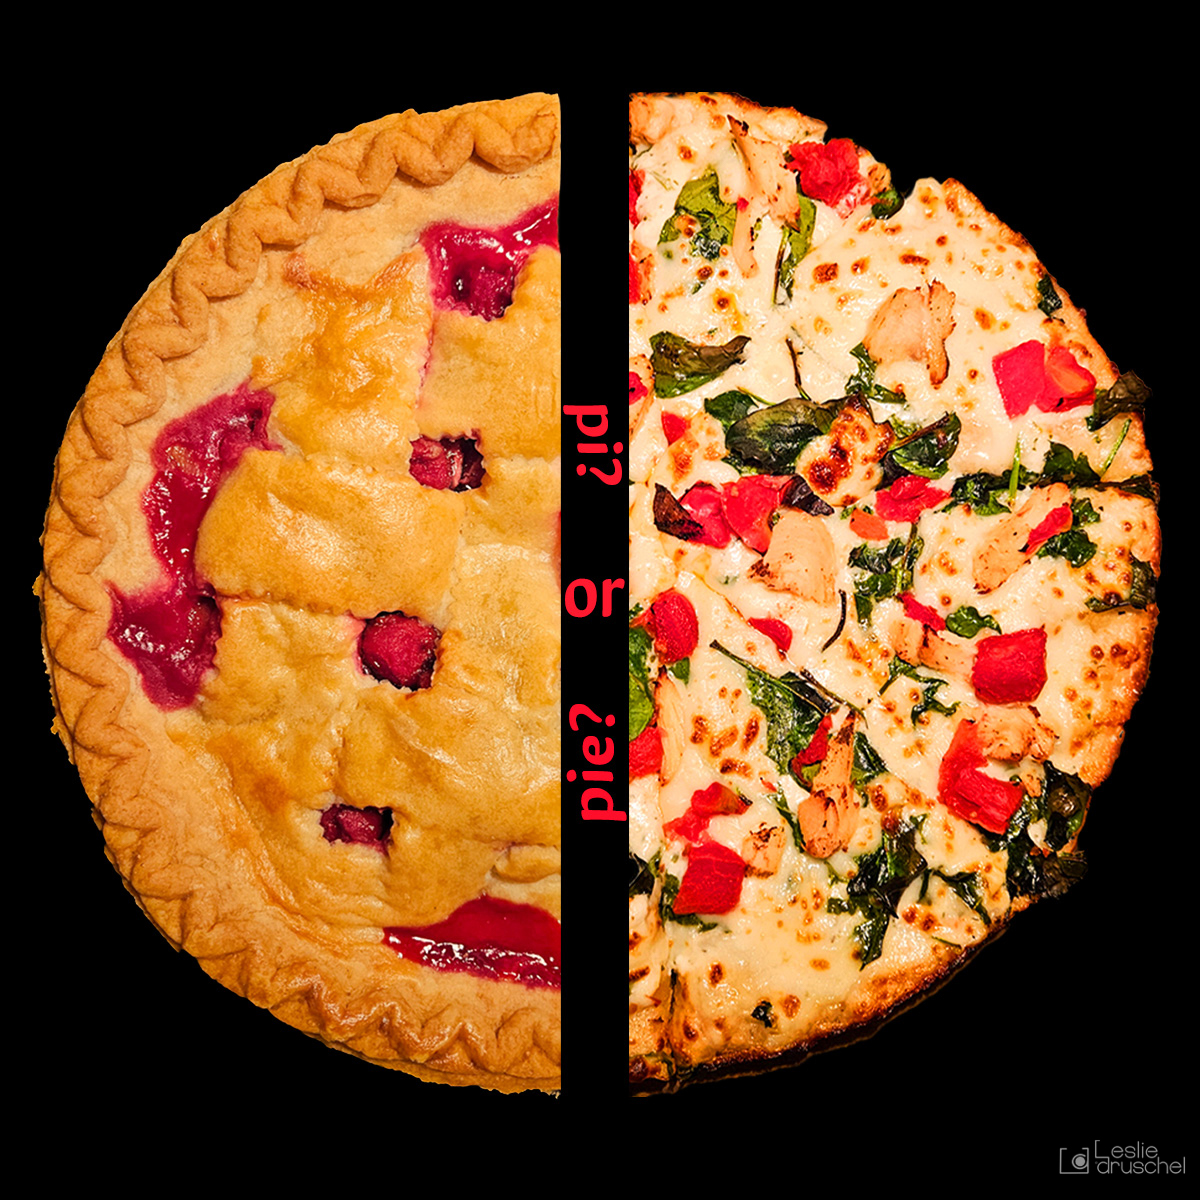 Cherry pie and Pizza. Pi or Pie